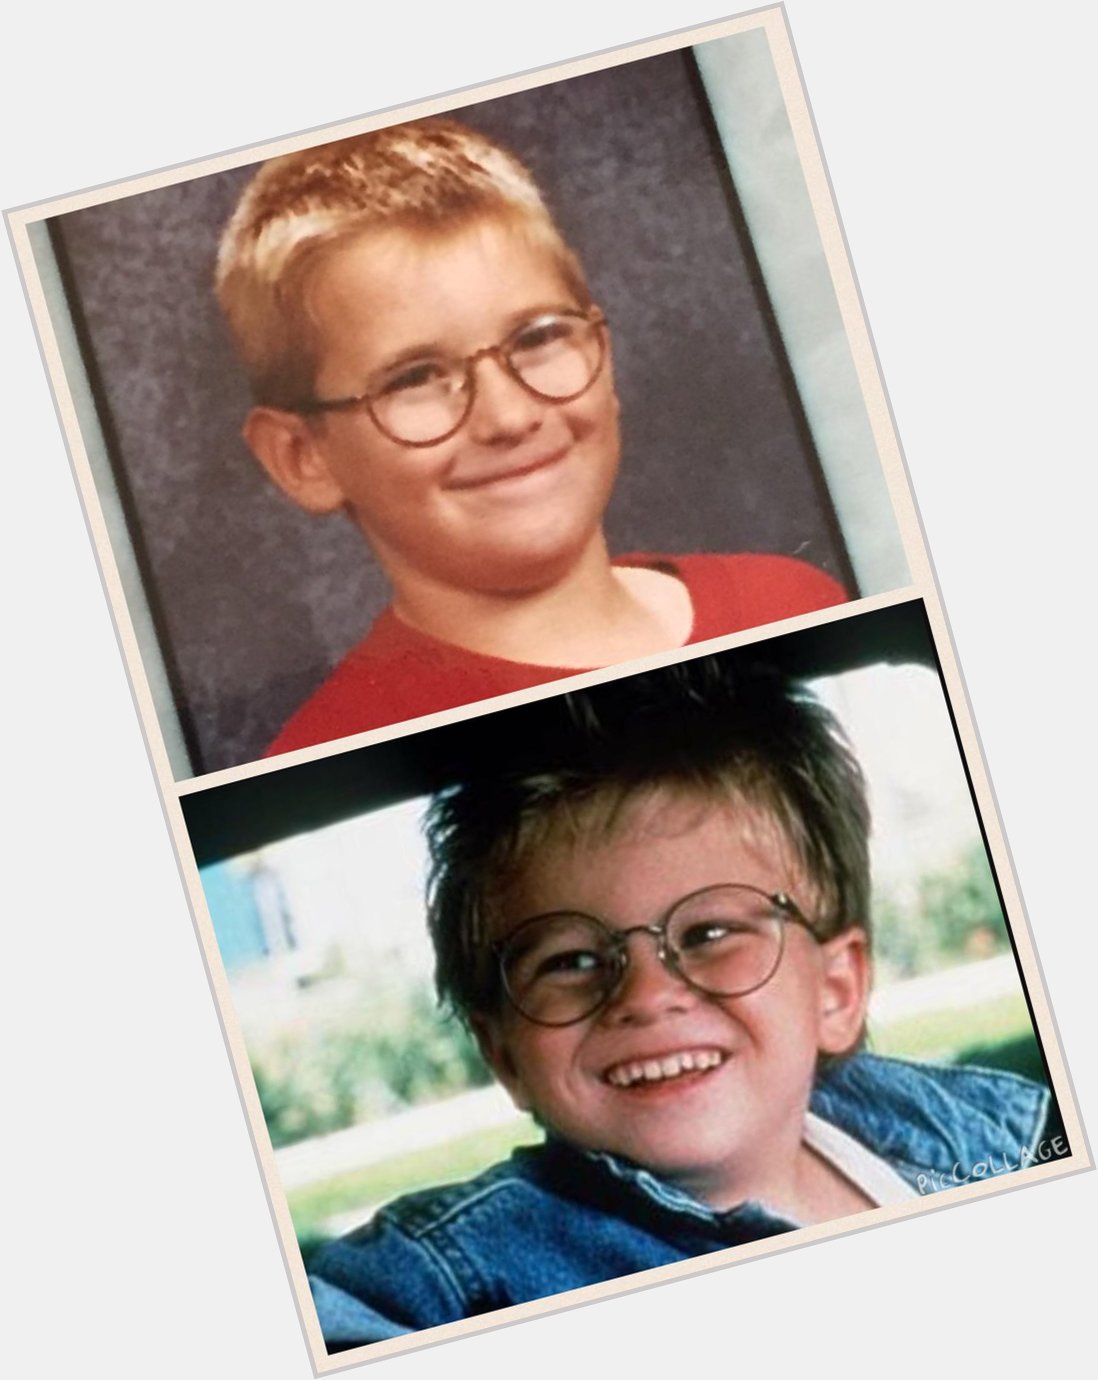 Happy bday to my friend of 16 yrs Jonathan Lipnicki aka You\ll always be a 103 pounder in my heart:) 